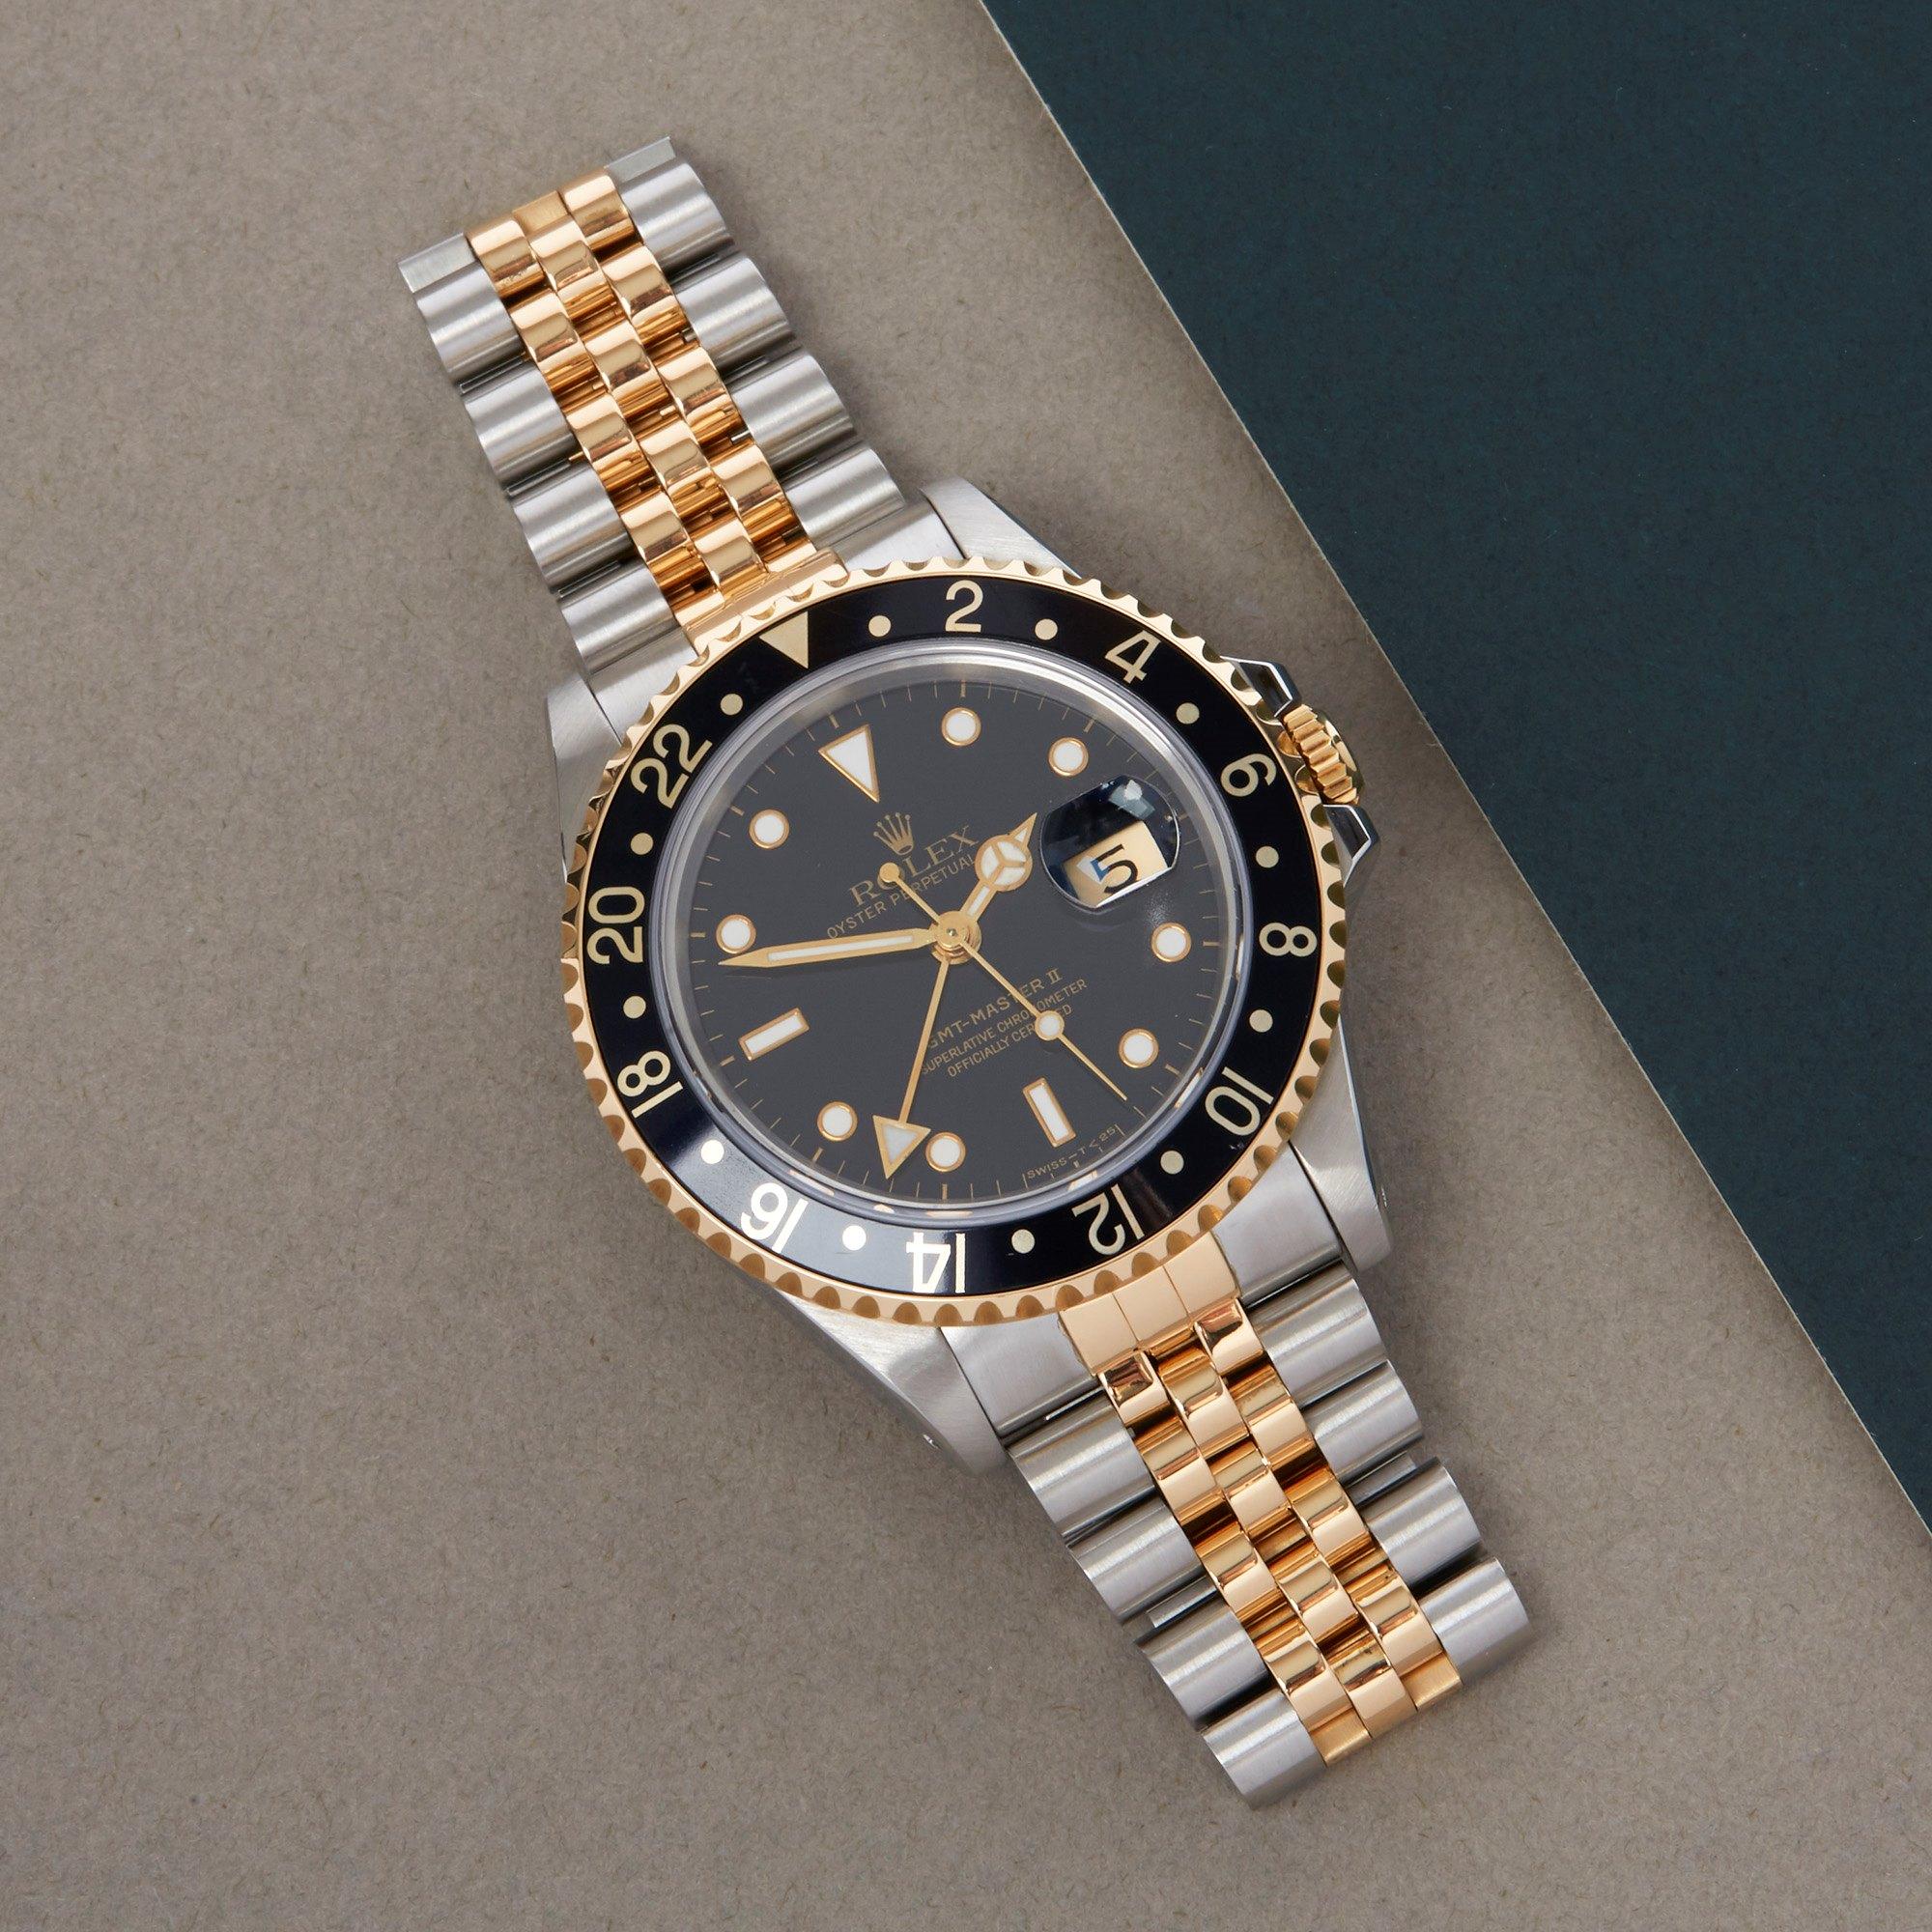 Xupes Reference: W007602
Manufacturer: Rolex
Model: GMT-Master II
Model Variant: 0
Model Number: 16713
Age: 1991
Gender: Men
Complete With: Rolex Box, Manuals, Guarantee, Calendar Card & Swing Tag
Dial: Black Other
Glass: Sapphire Crystal
Case Size: